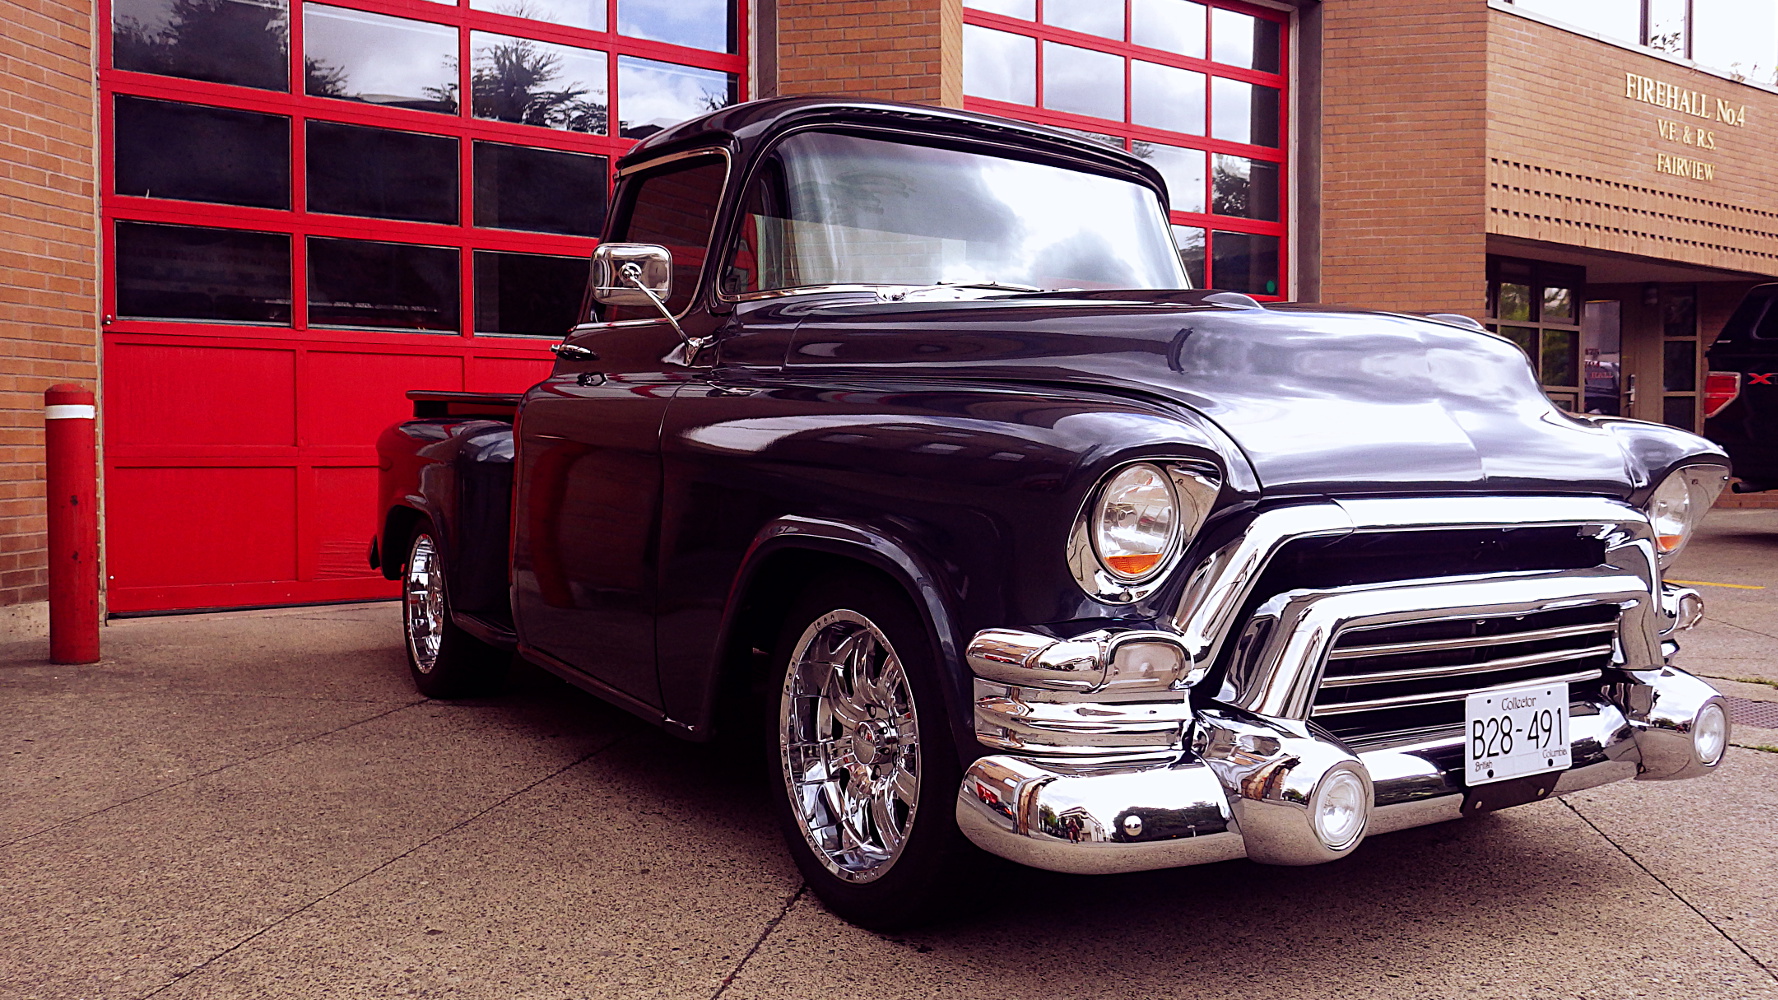 Tuesday morning this classic old 1950s pickup truck - I think it’s a GMC